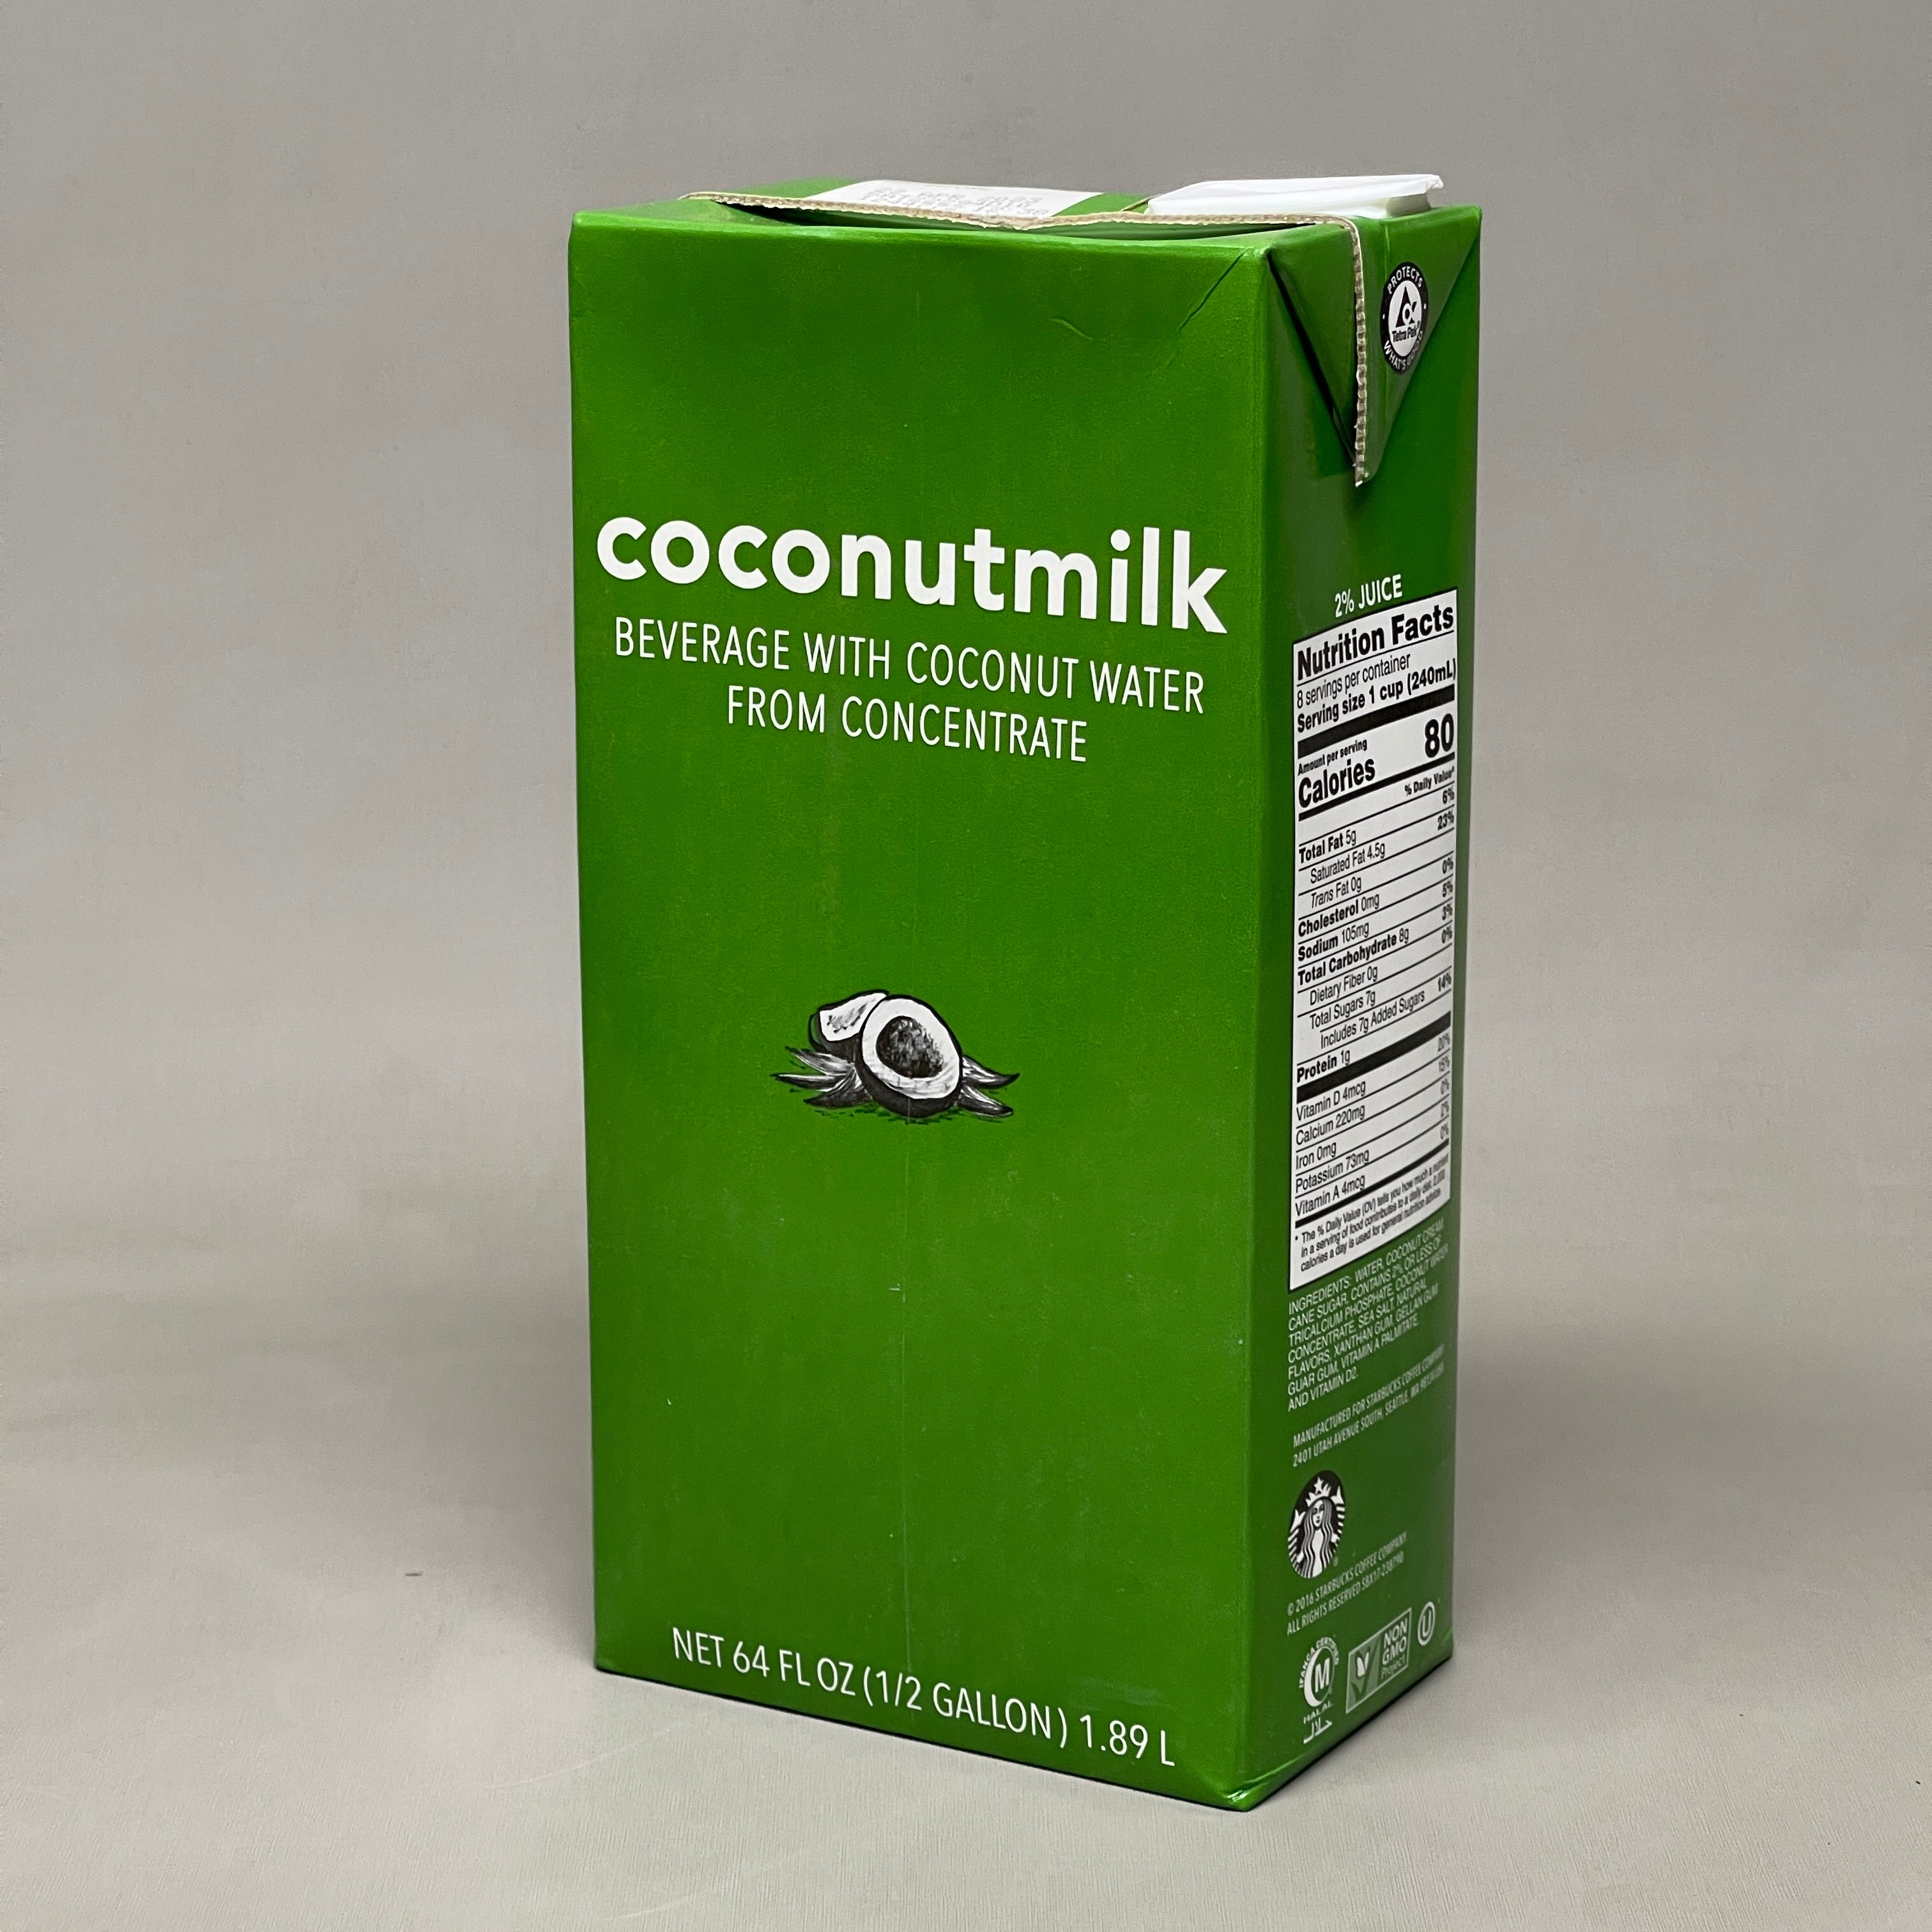 STARBUCKS (8 PACK) Coconut Milk Beverage From Concentrate 64 fl oz BB 05/24 (New)